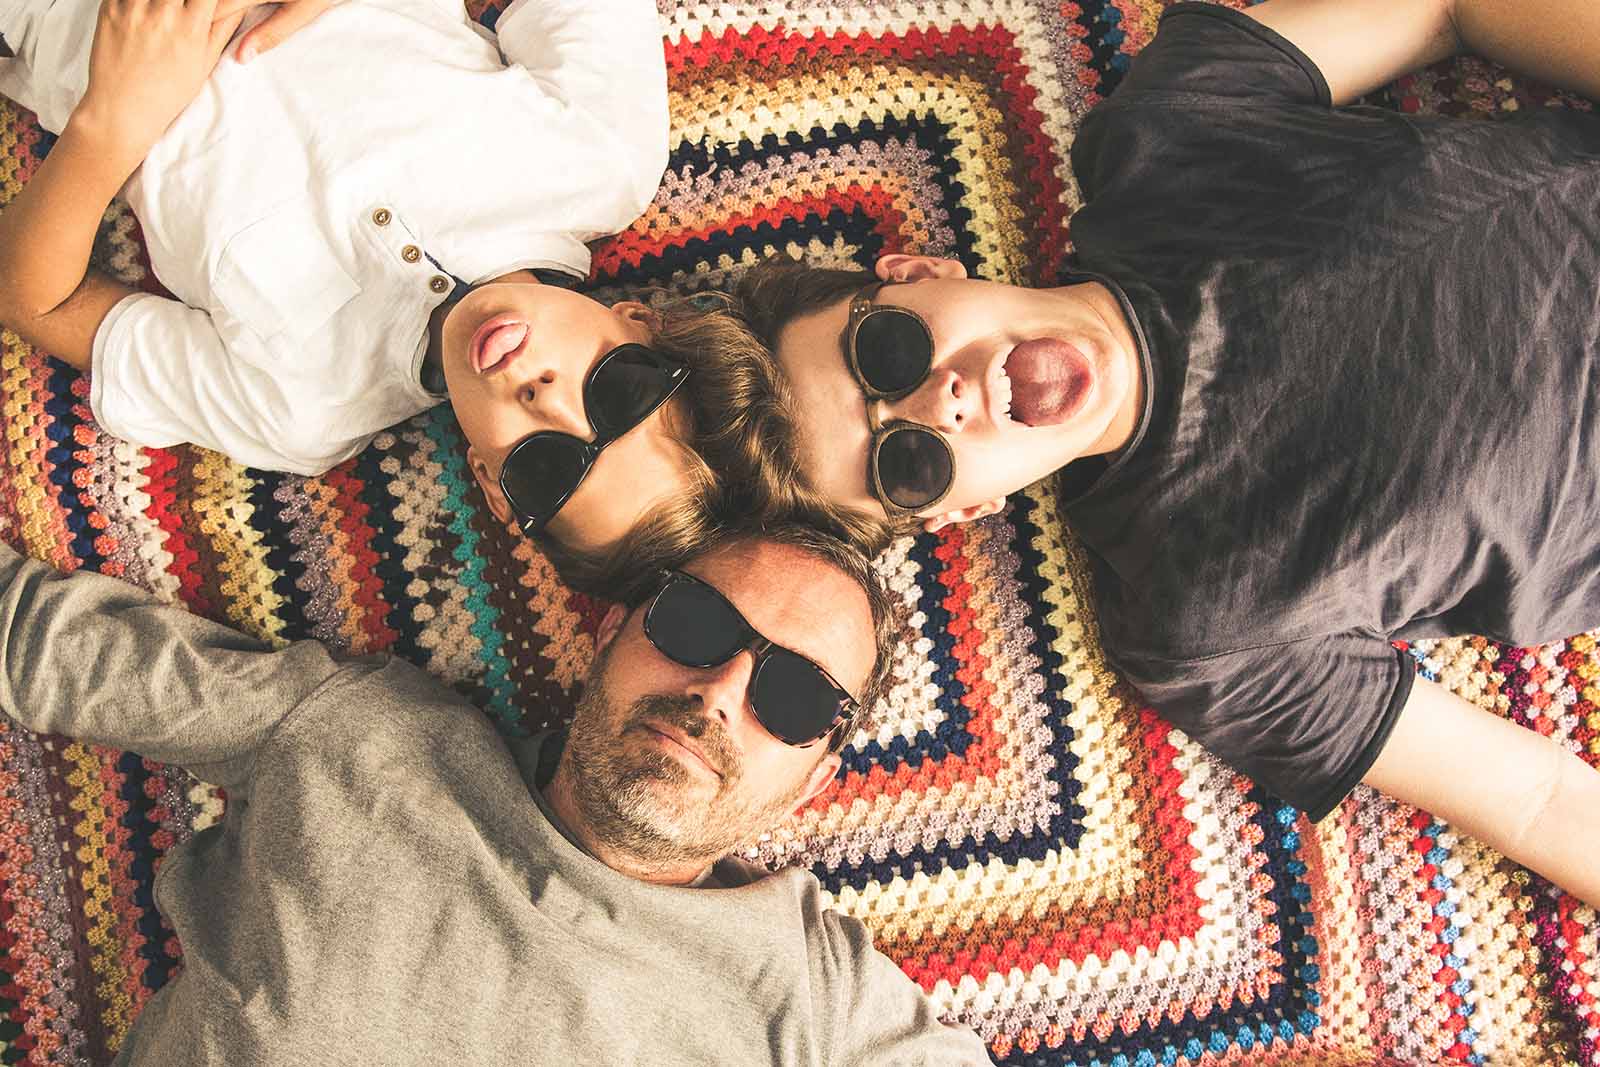 Dad and sons lying on a blanket relaxing | Top tips for travelling in a large group while keeping friendships intact